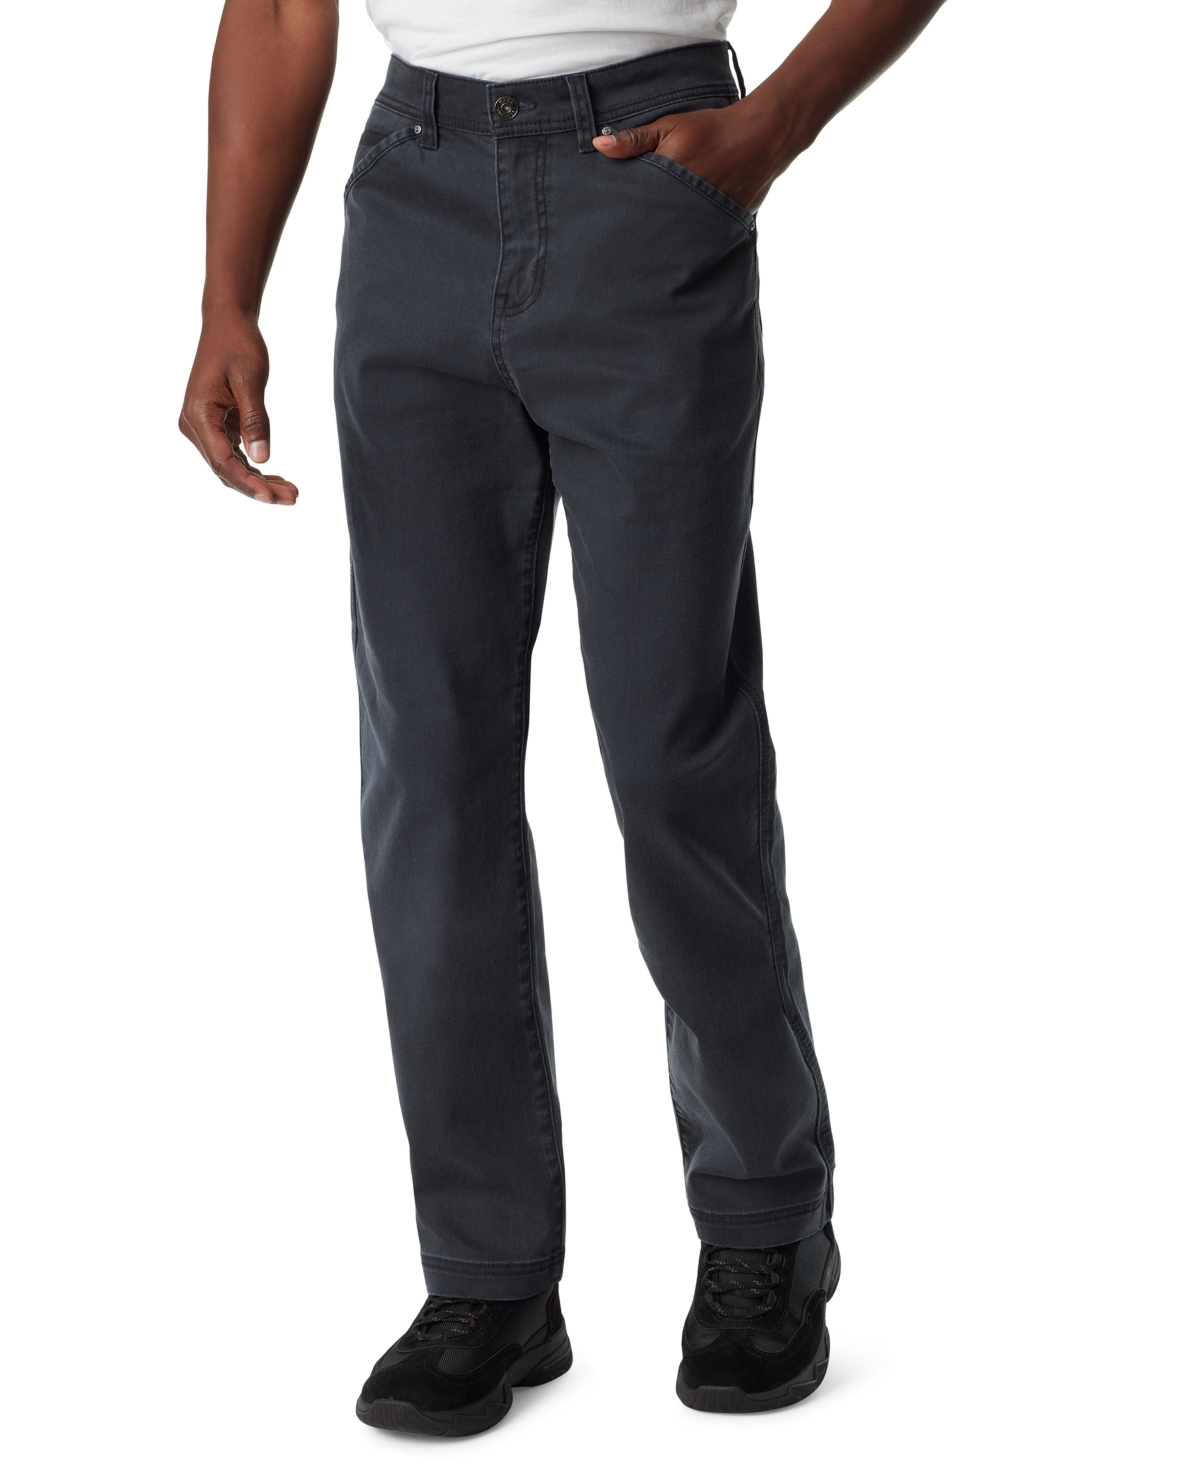 Men's Straight-Fit Everyday Pants - Ermine